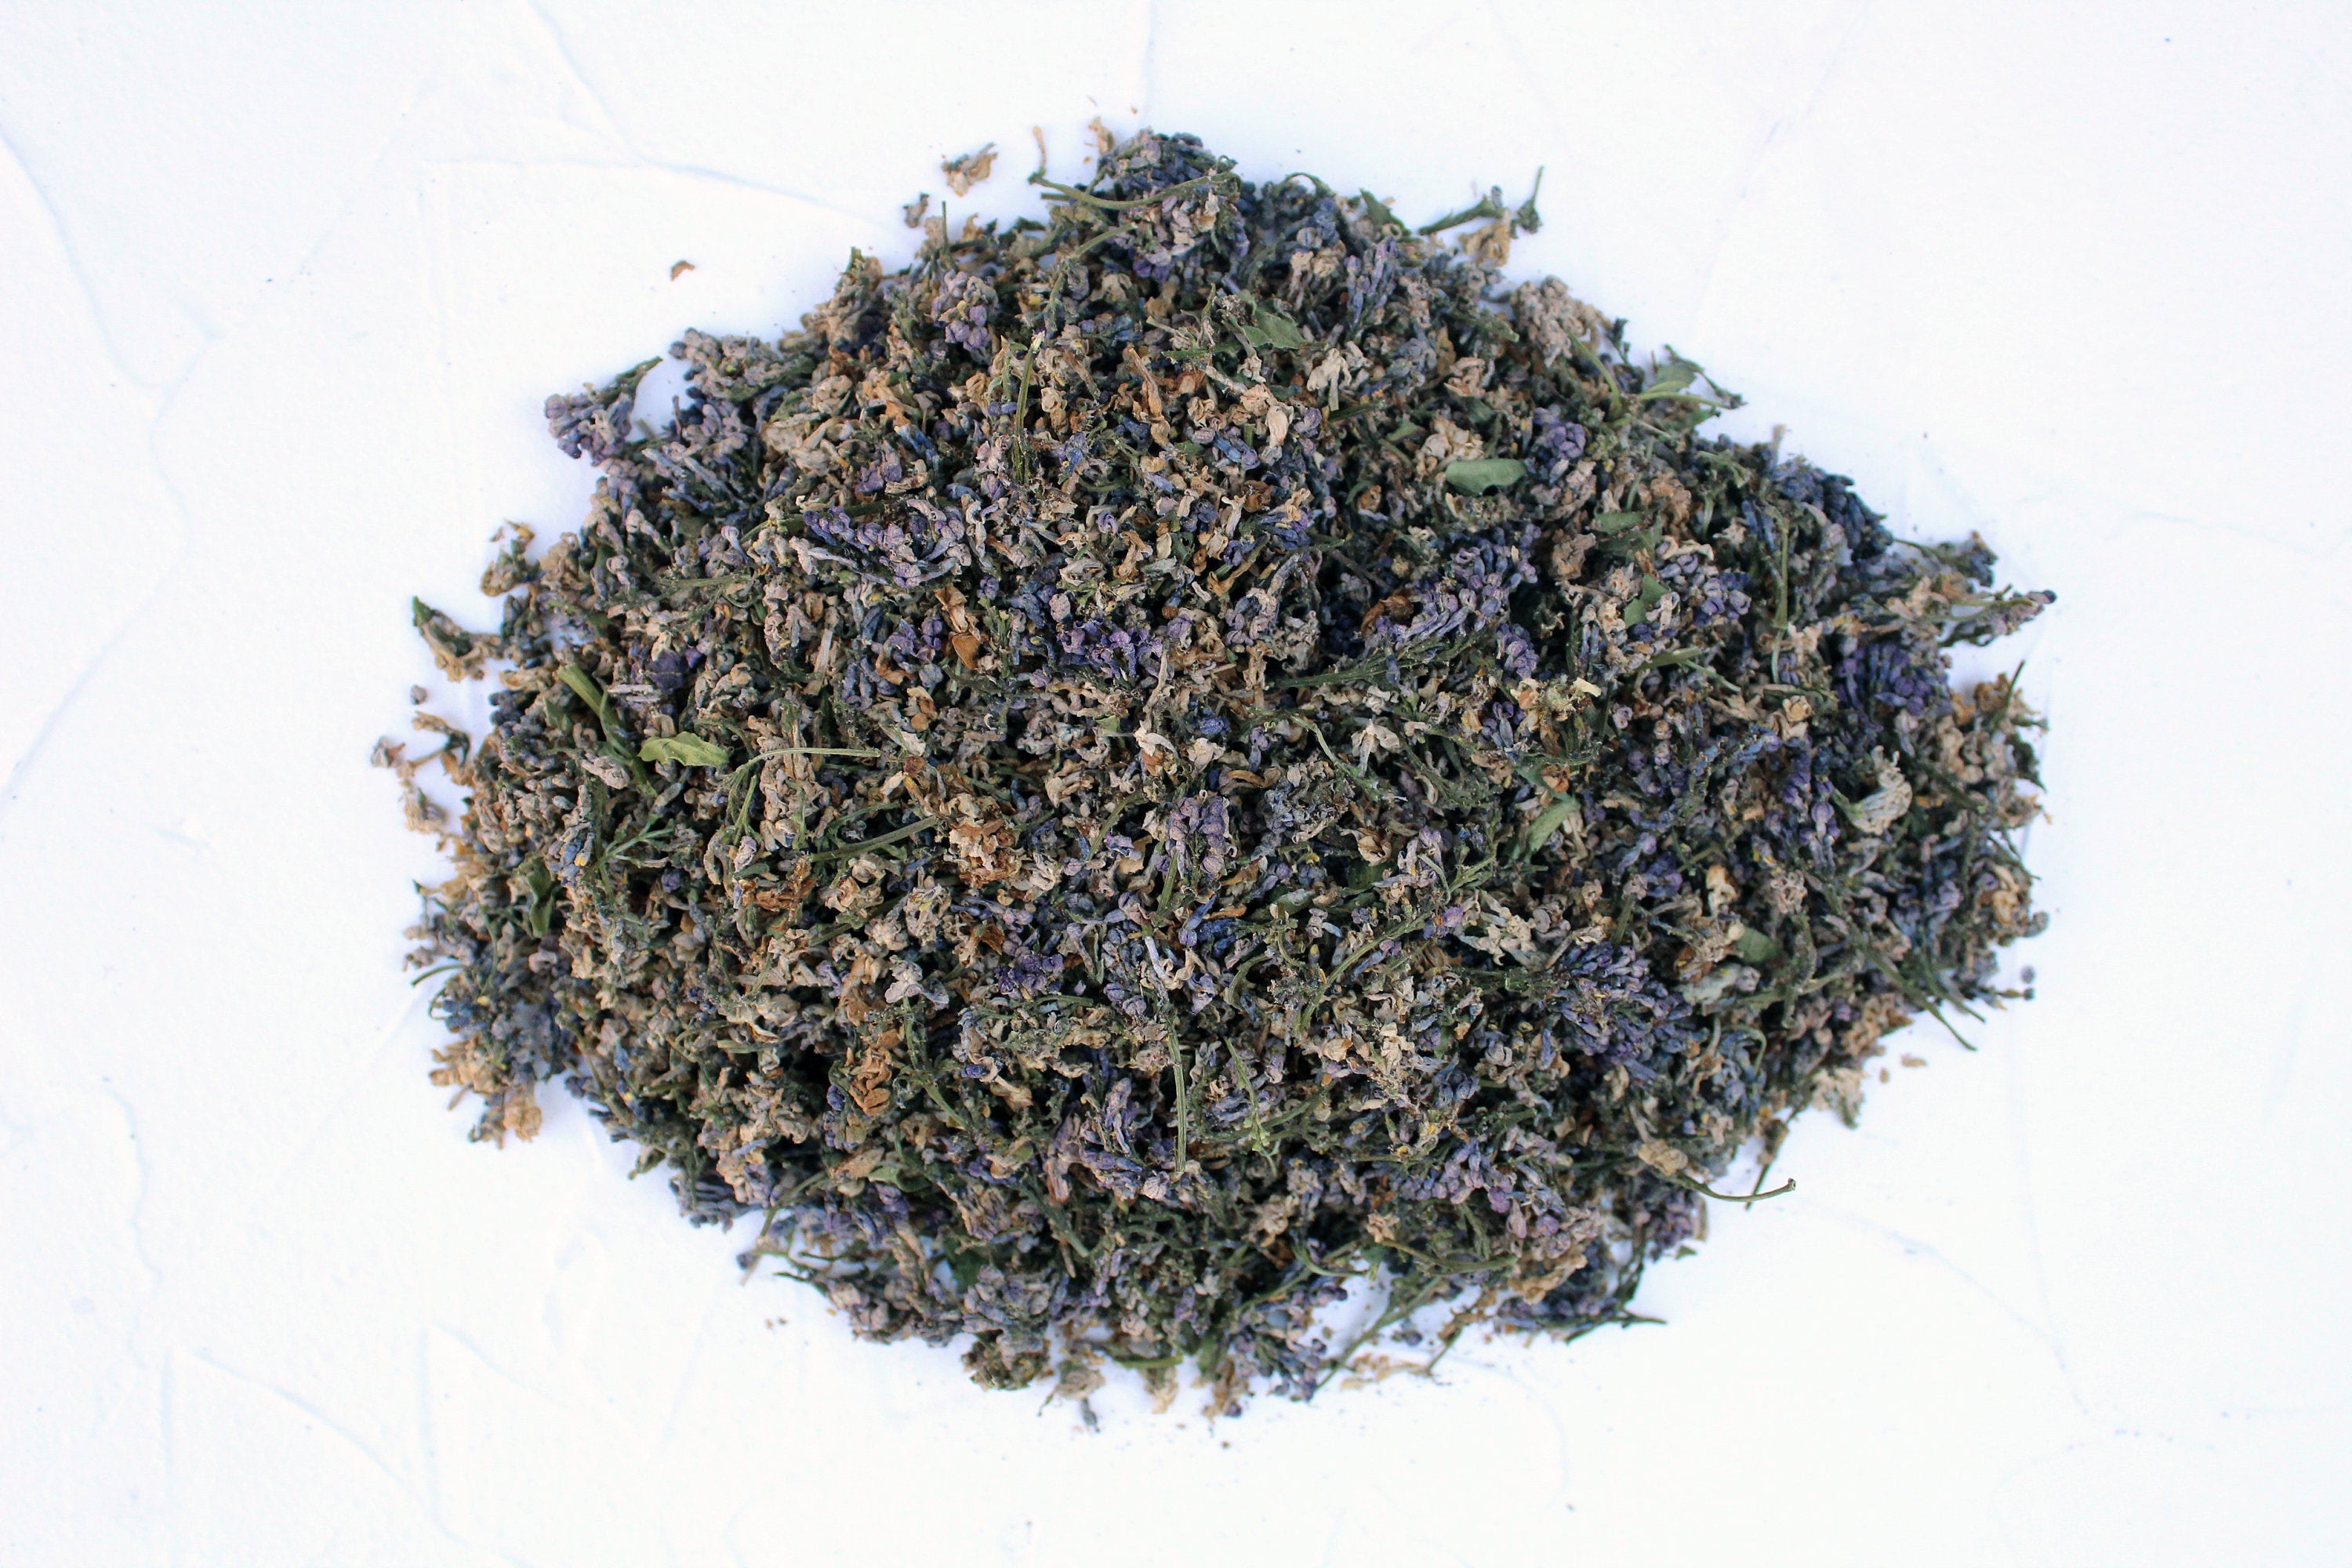 250 grams of Lilac flowers, Dried, High Quality, Natural, Organic, Biodegraddable, Craft, Wedding toss, Wedding confetti